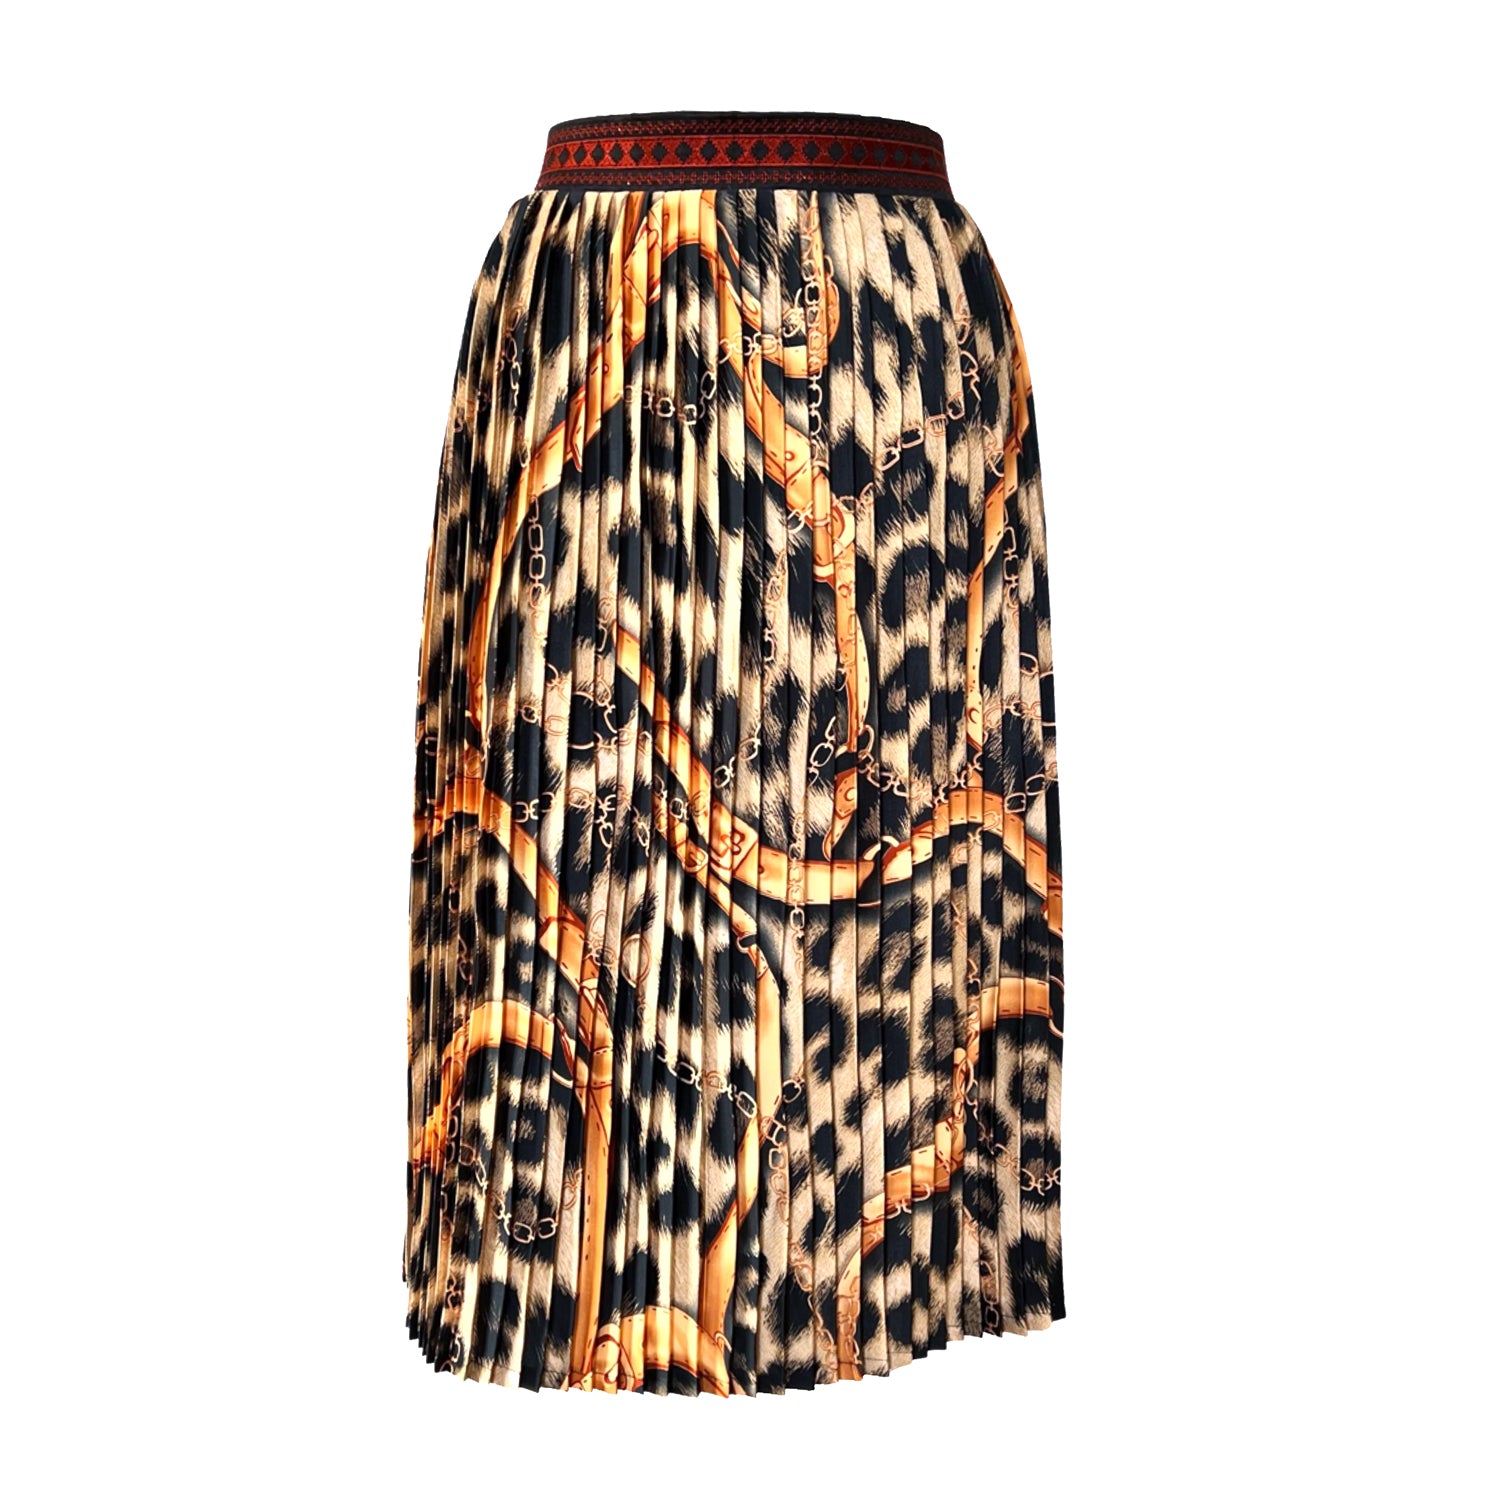 Embroidered Pleated Scarf Midi Skirt in Animal Print